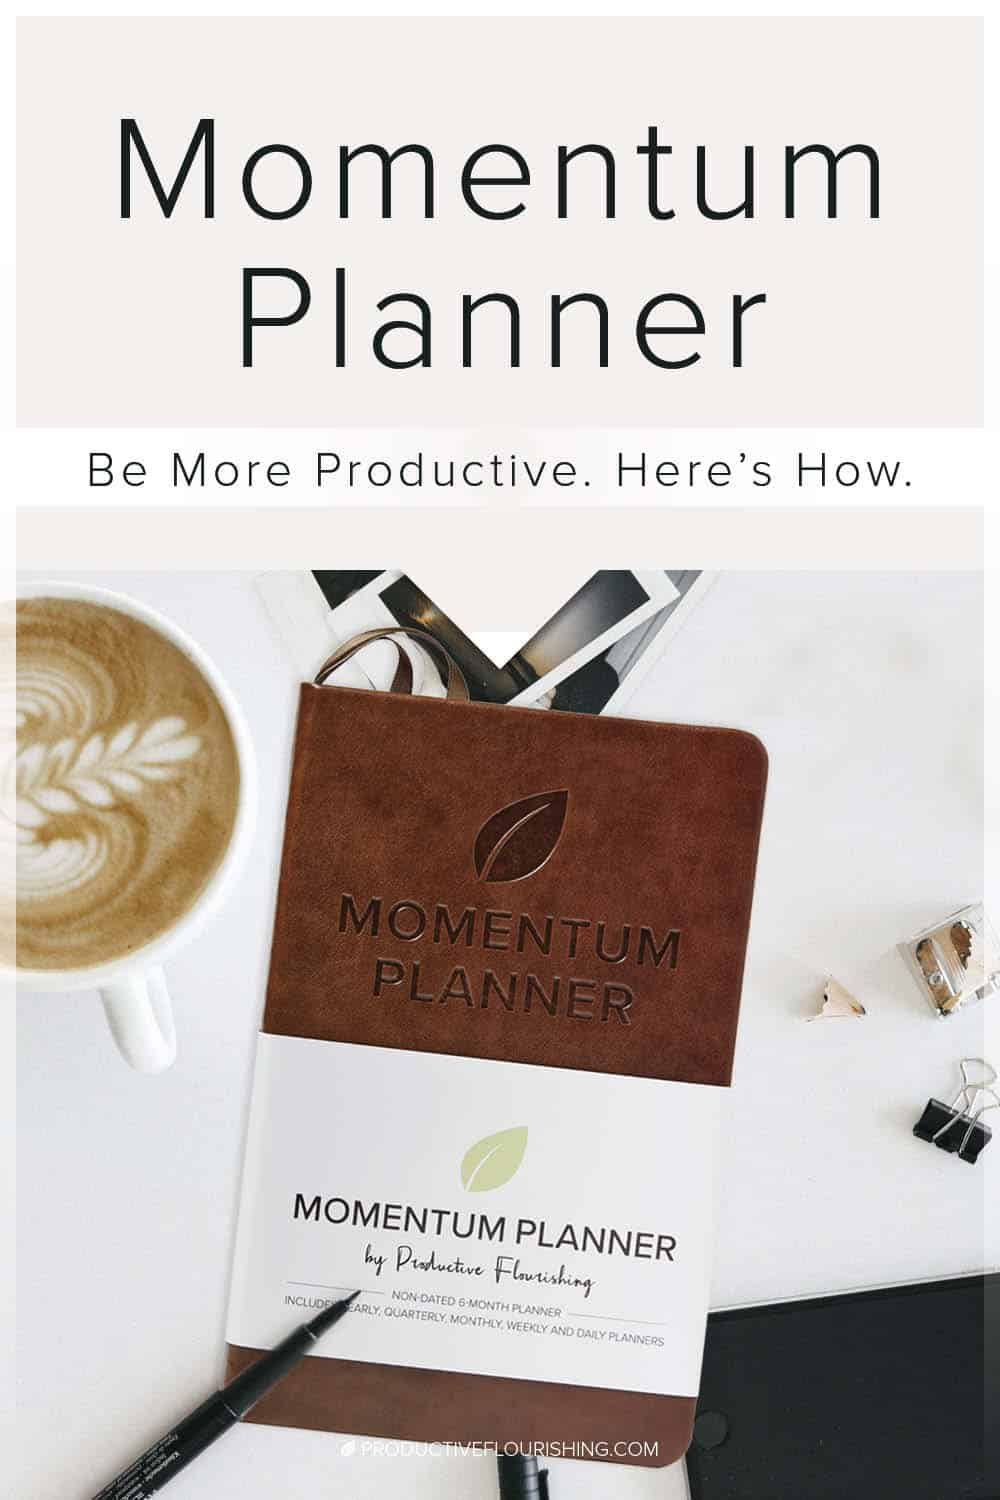 Here are 6 reasons a pre-made, physical, bound Momentum Planner can add value to your planning processes and improve your productivity over a purely digital version. #entrepreneurproductivity #smallbusinessproductivity #productiveflourishing